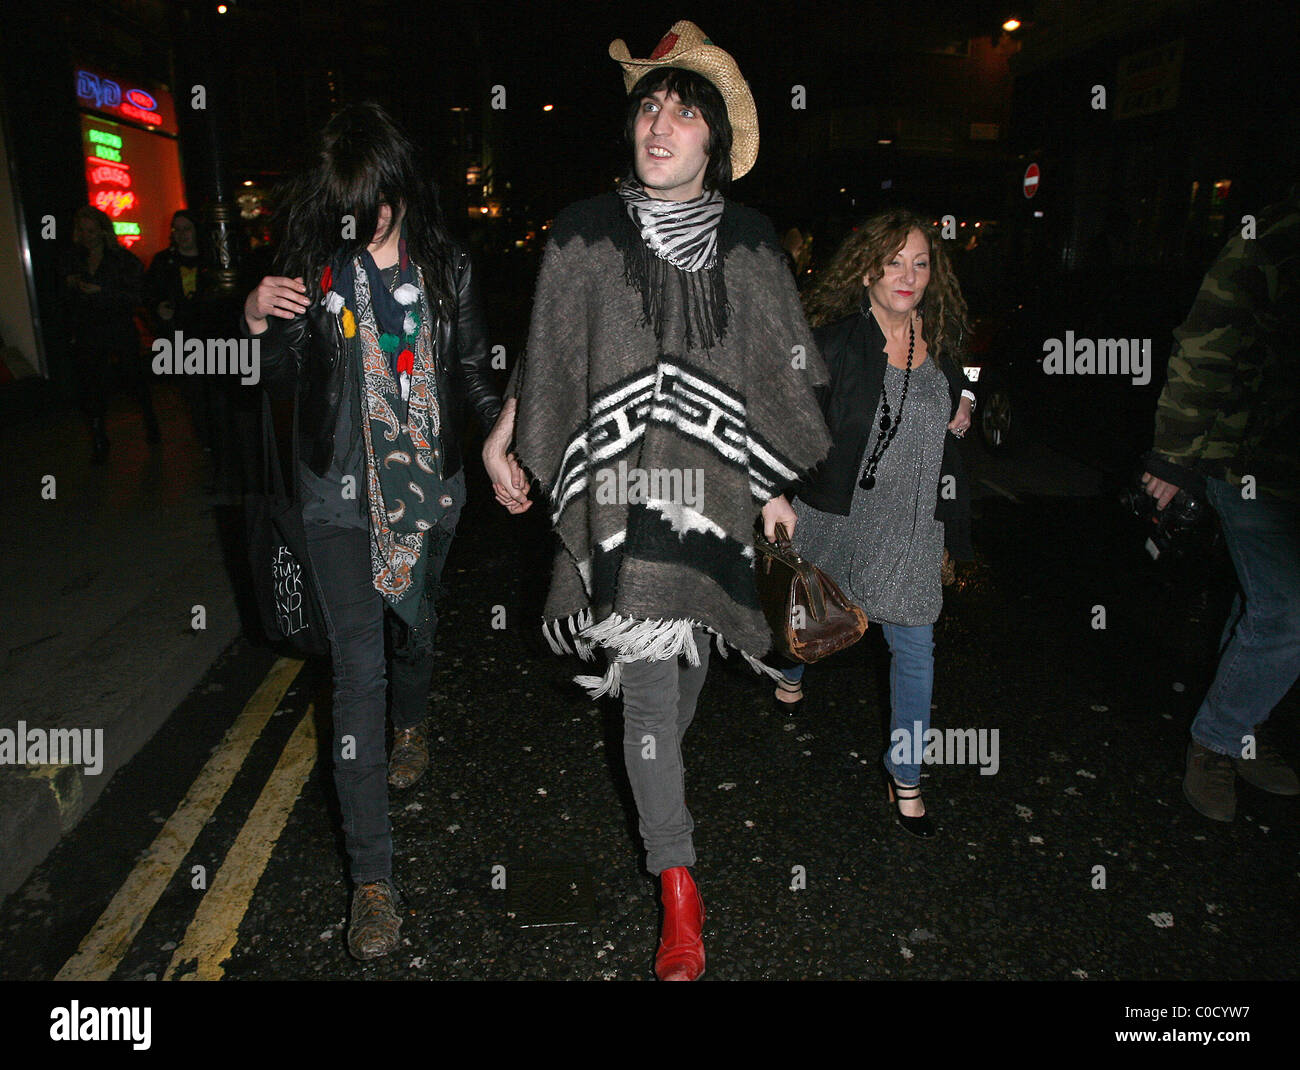 Noel Fielding leaving the Groucho club, wearing a bizarre outift, with Alison Mosshart, from 'The Kills' London, England - Stock Photo